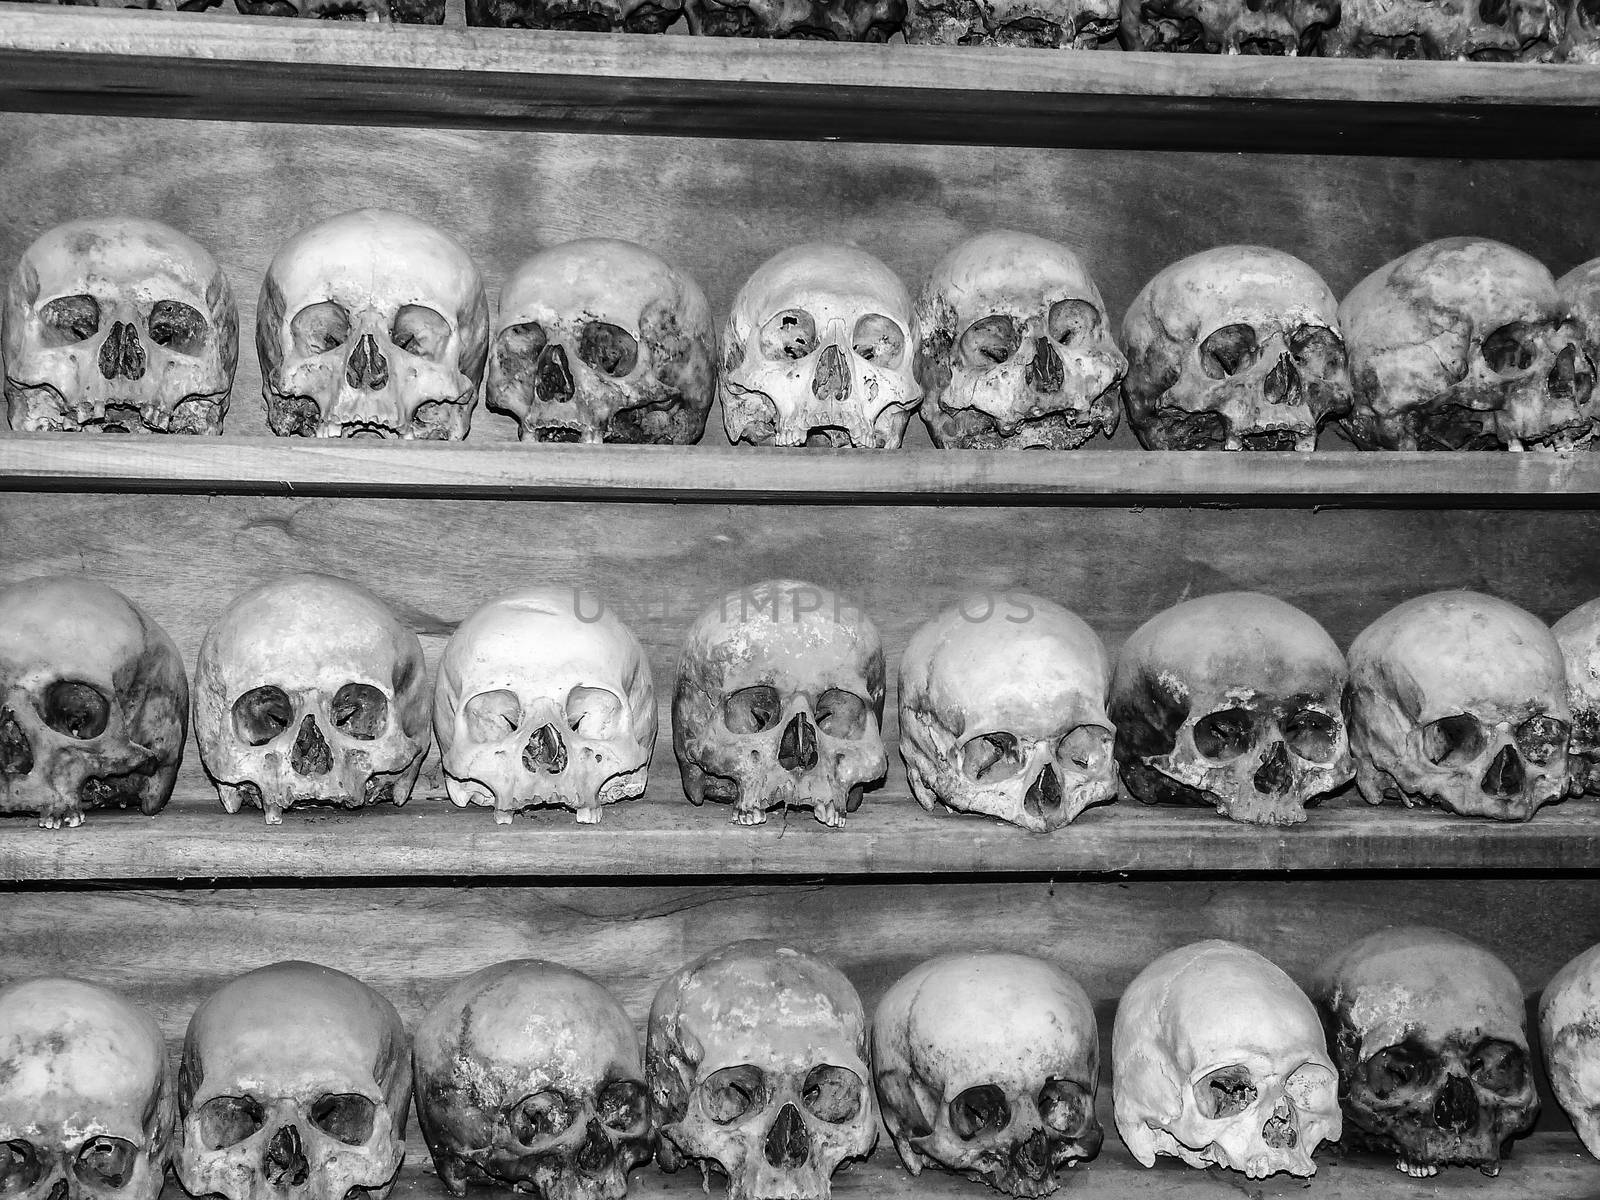 Collection of human skulls - black and white image